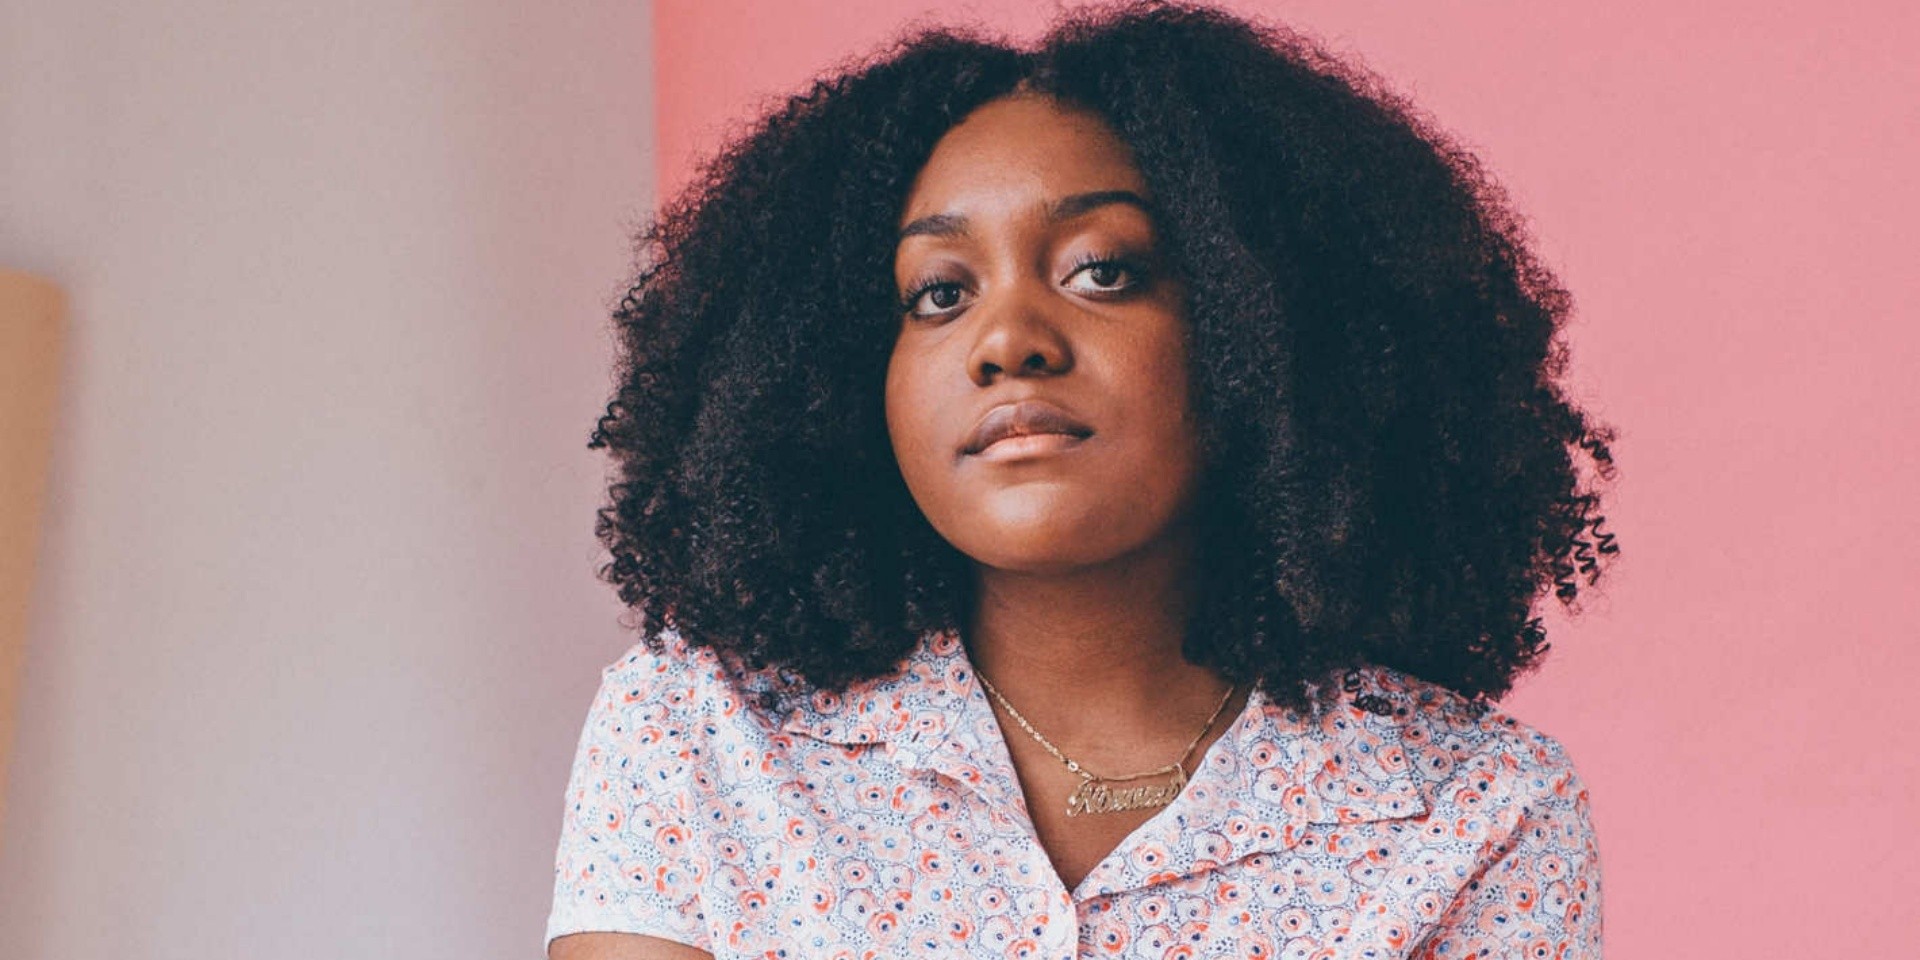 Noname ushers in 2019 with new single 'Song 31' – listen